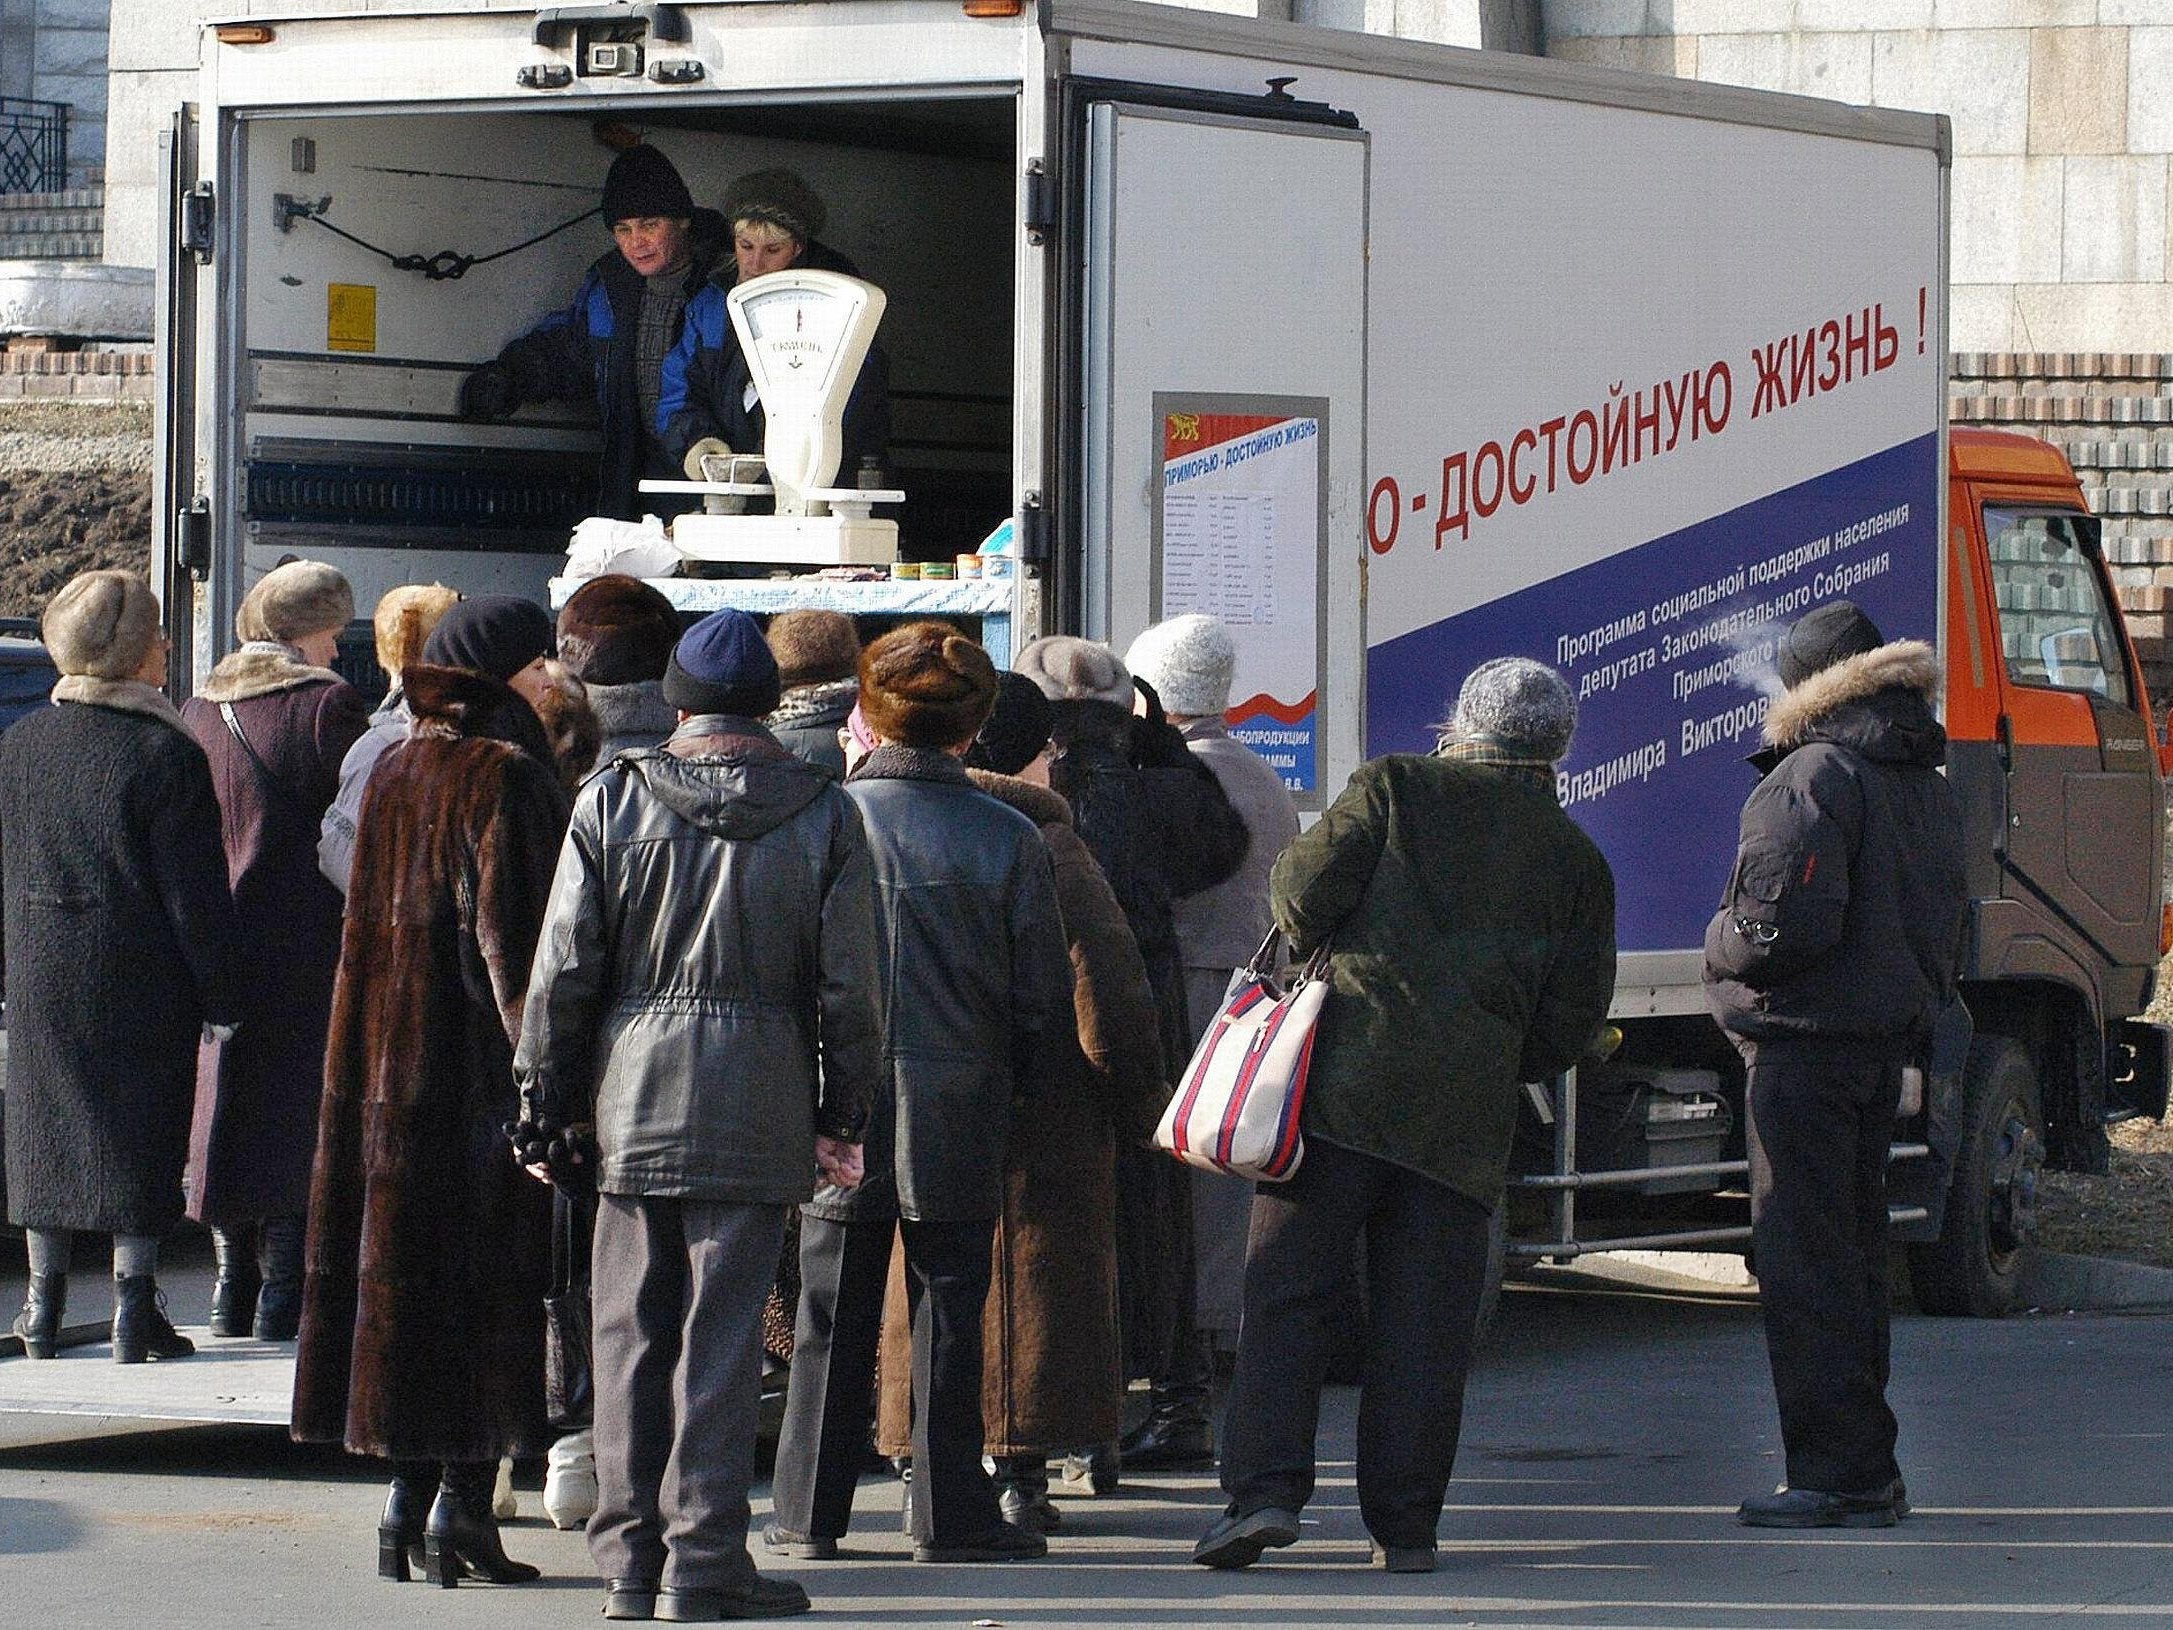 Residents of Vladivostok queue up for free food aid